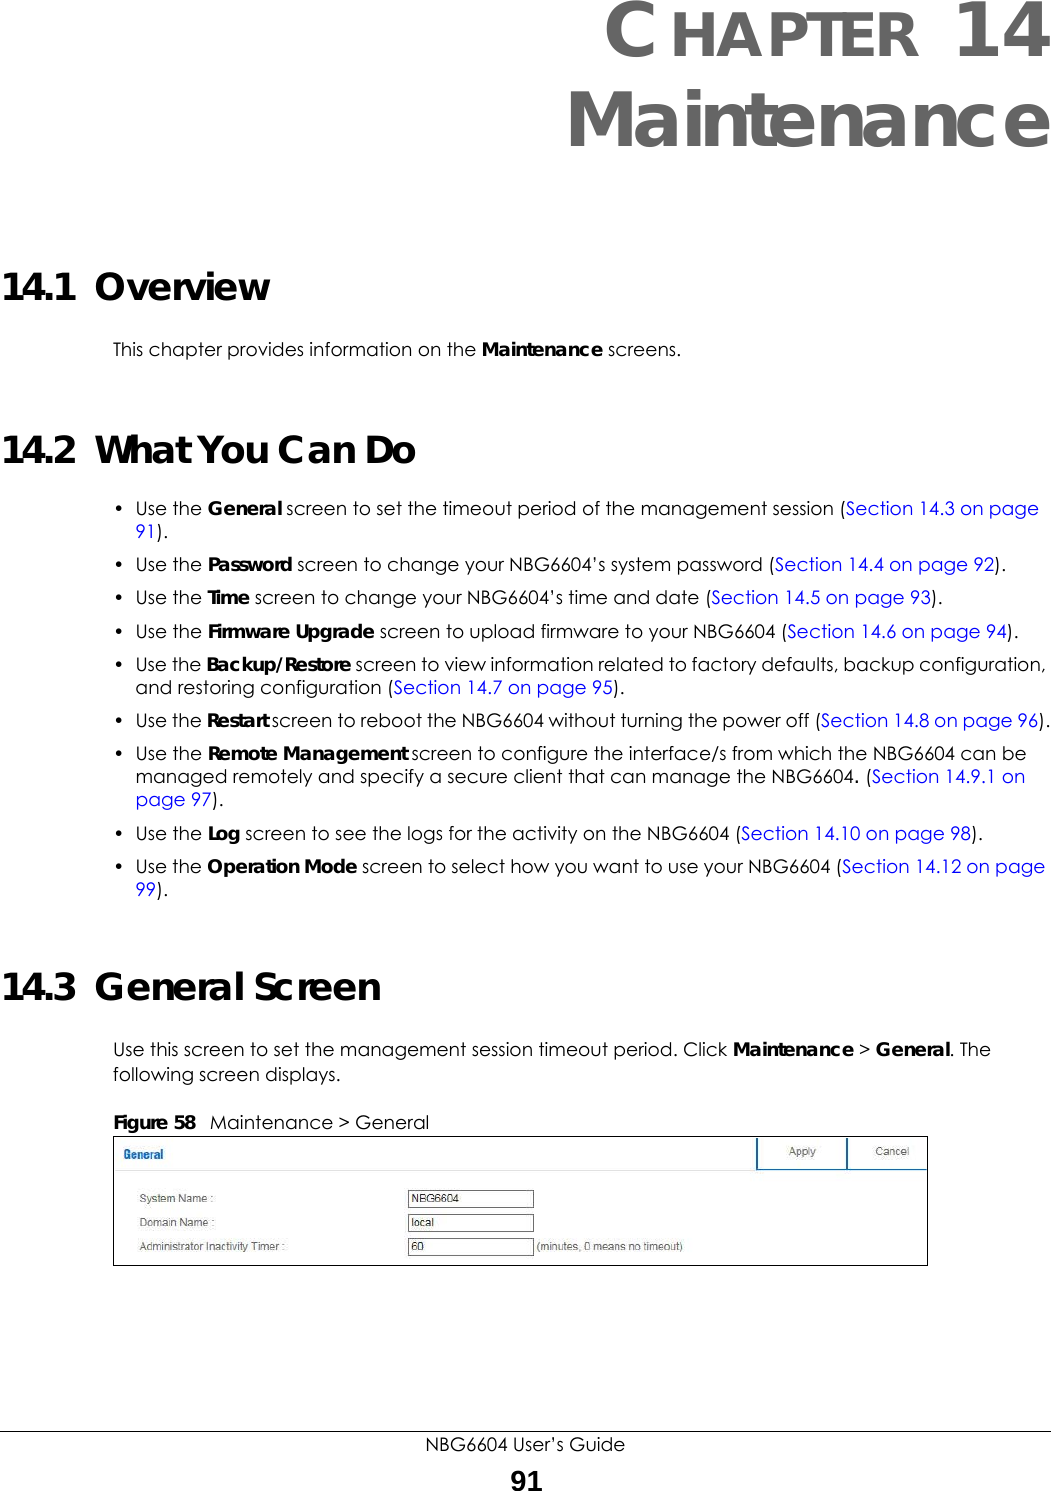 NBG6604 User’s Guide91CHAPTER 14 Maintenance14.1  OverviewThis chapter provides information on the Maintenance screens. 14.2  What You Can Do• Use the General screen to set the timeout period of the management session (Section 14.3 on page 91). • Use the Password screen to change your NBG6604’s system password (Section 14.4 on page 92).• Use the Time screen to change your NBG6604’s time and date (Section 14.5 on page 93).• Use the Firmware Upgrade screen to upload firmware to your NBG6604 (Section 14.6 on page 94).• Use the Backup/Restore screen to view information related to factory defaults, backup configuration, and restoring configuration (Section 14.7 on page 95).• Use the Restart screen to reboot the NBG6604 without turning the power off (Section 14.8 on page 96).• Use the Remote Management screen to configure the interface/s from which the NBG6604 can be managed remotely and specify a secure client that can manage the NBG6604. (Section 14.9.1 on page 97).• Use the Log screen to see the logs for the activity on the NBG6604 (Section 14.10 on page 98).• Use the Operation Mode screen to select how you want to use your NBG6604 (Section 14.12 on page 99). 14.3  General Screen Use this screen to set the management session timeout period. Click Maintenance &gt; General. The following screen displays.Figure 58   Maintenance &gt; General 